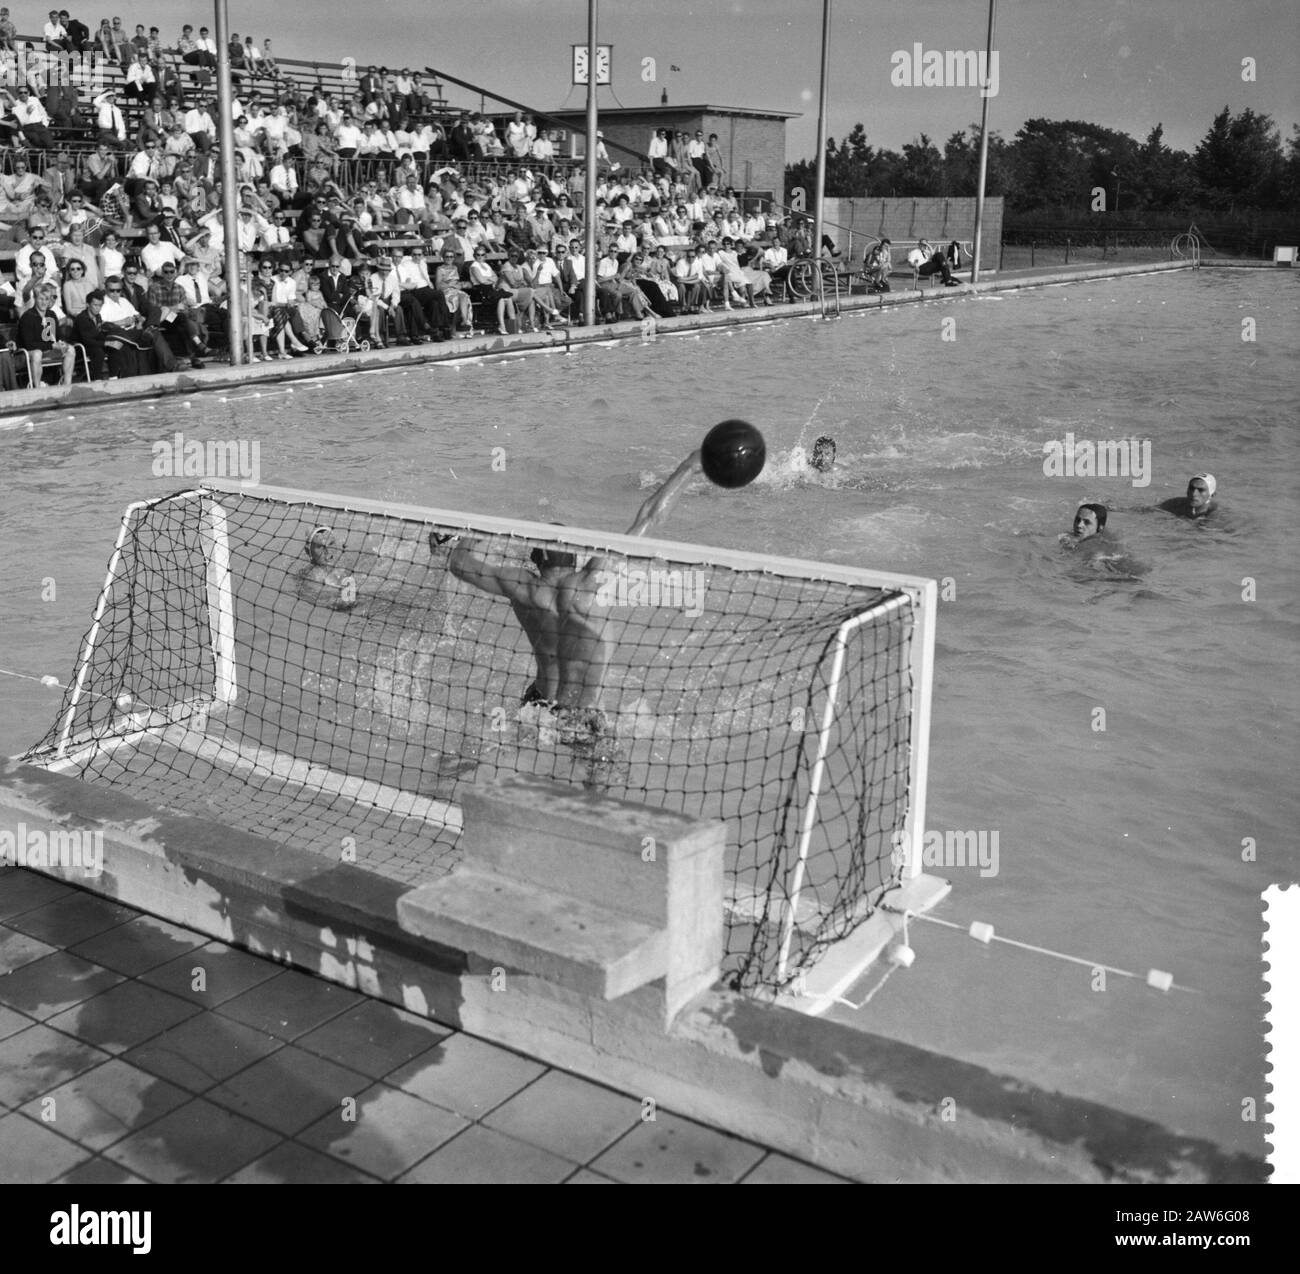 swimming contests Country Netherlands against Germany in Nijmegen. Waterpolo match Netherlands against Germany, game time for the German goal Date: July 19, 1958 Location: Nijmegen Keywords: sports, waterpolo Stock Photo